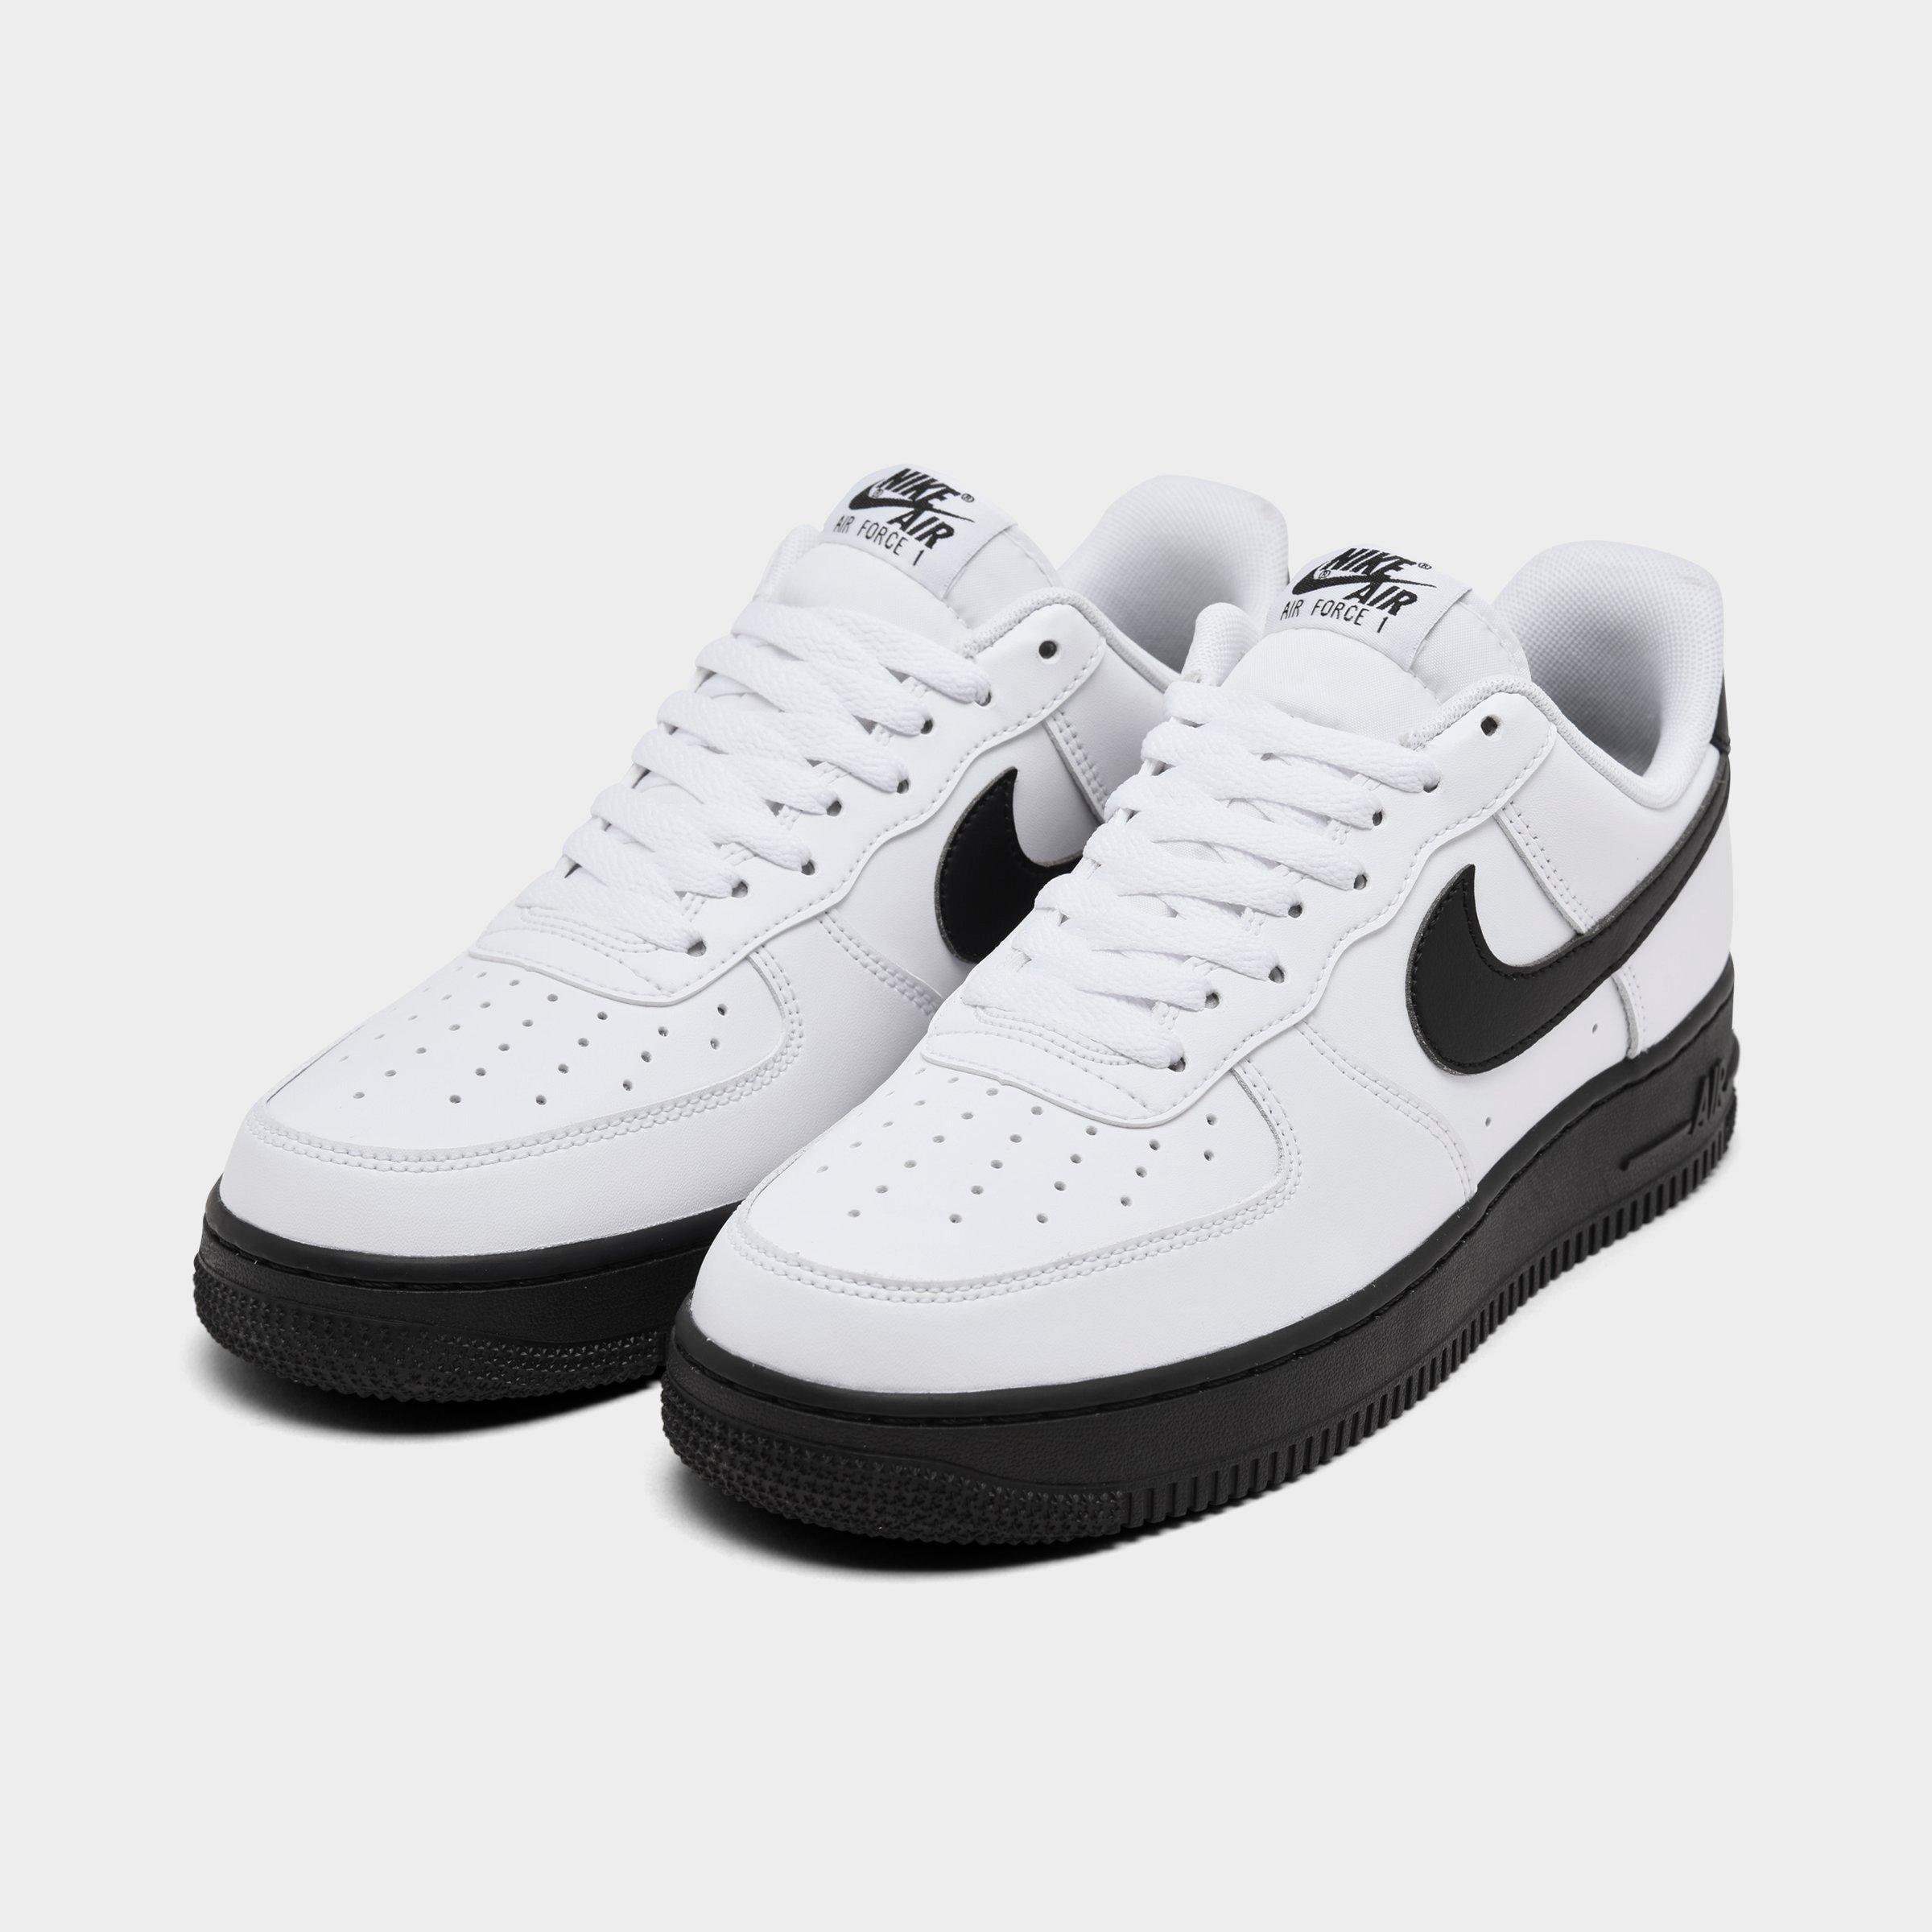 Men's Nike Air Force 1 '07 Casual Shoes 